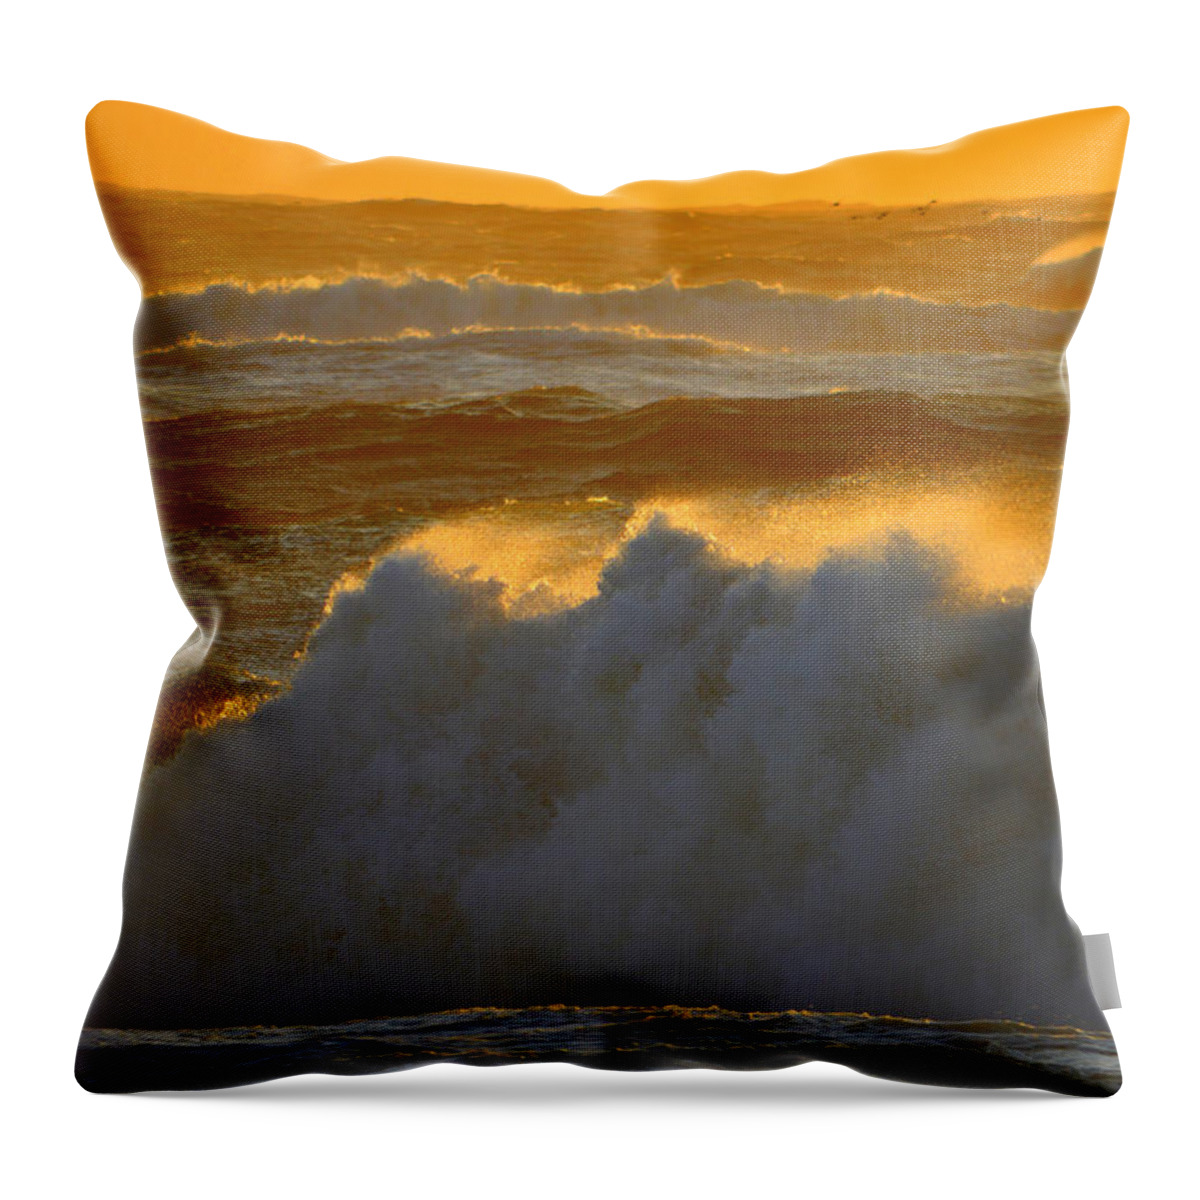 Ocean Throw Pillow featuring the photograph Ocean Fury - Cape Cod National Seashore by Dianne Cowen Cape Cod Photography